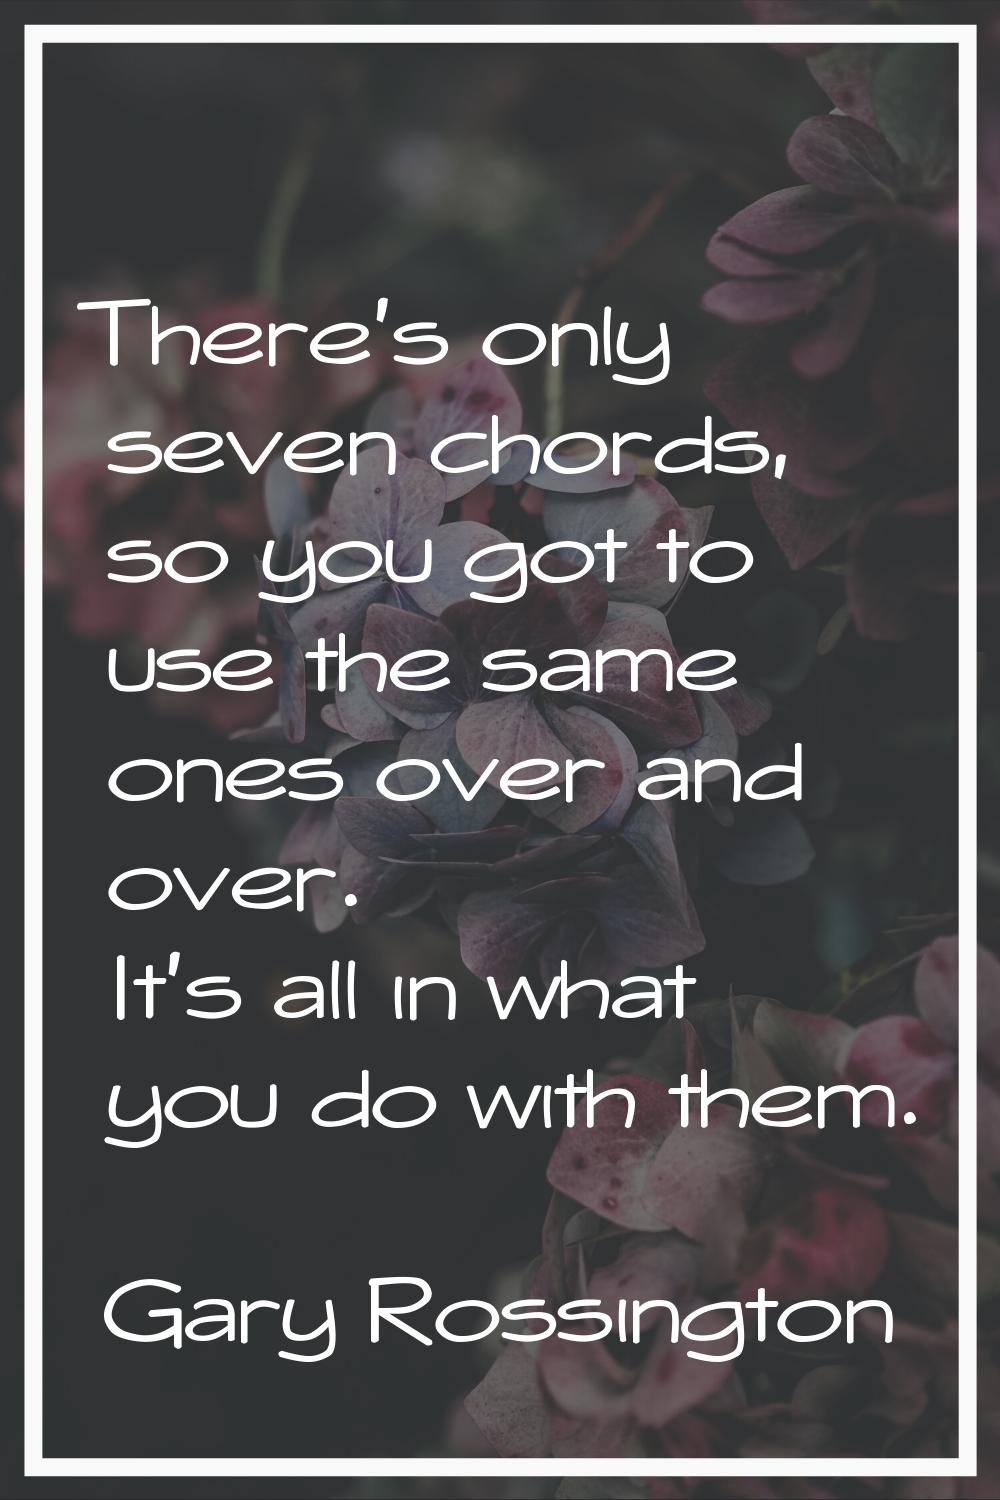 There's only seven chords, so you got to use the same ones over and over. It's all in what you do w